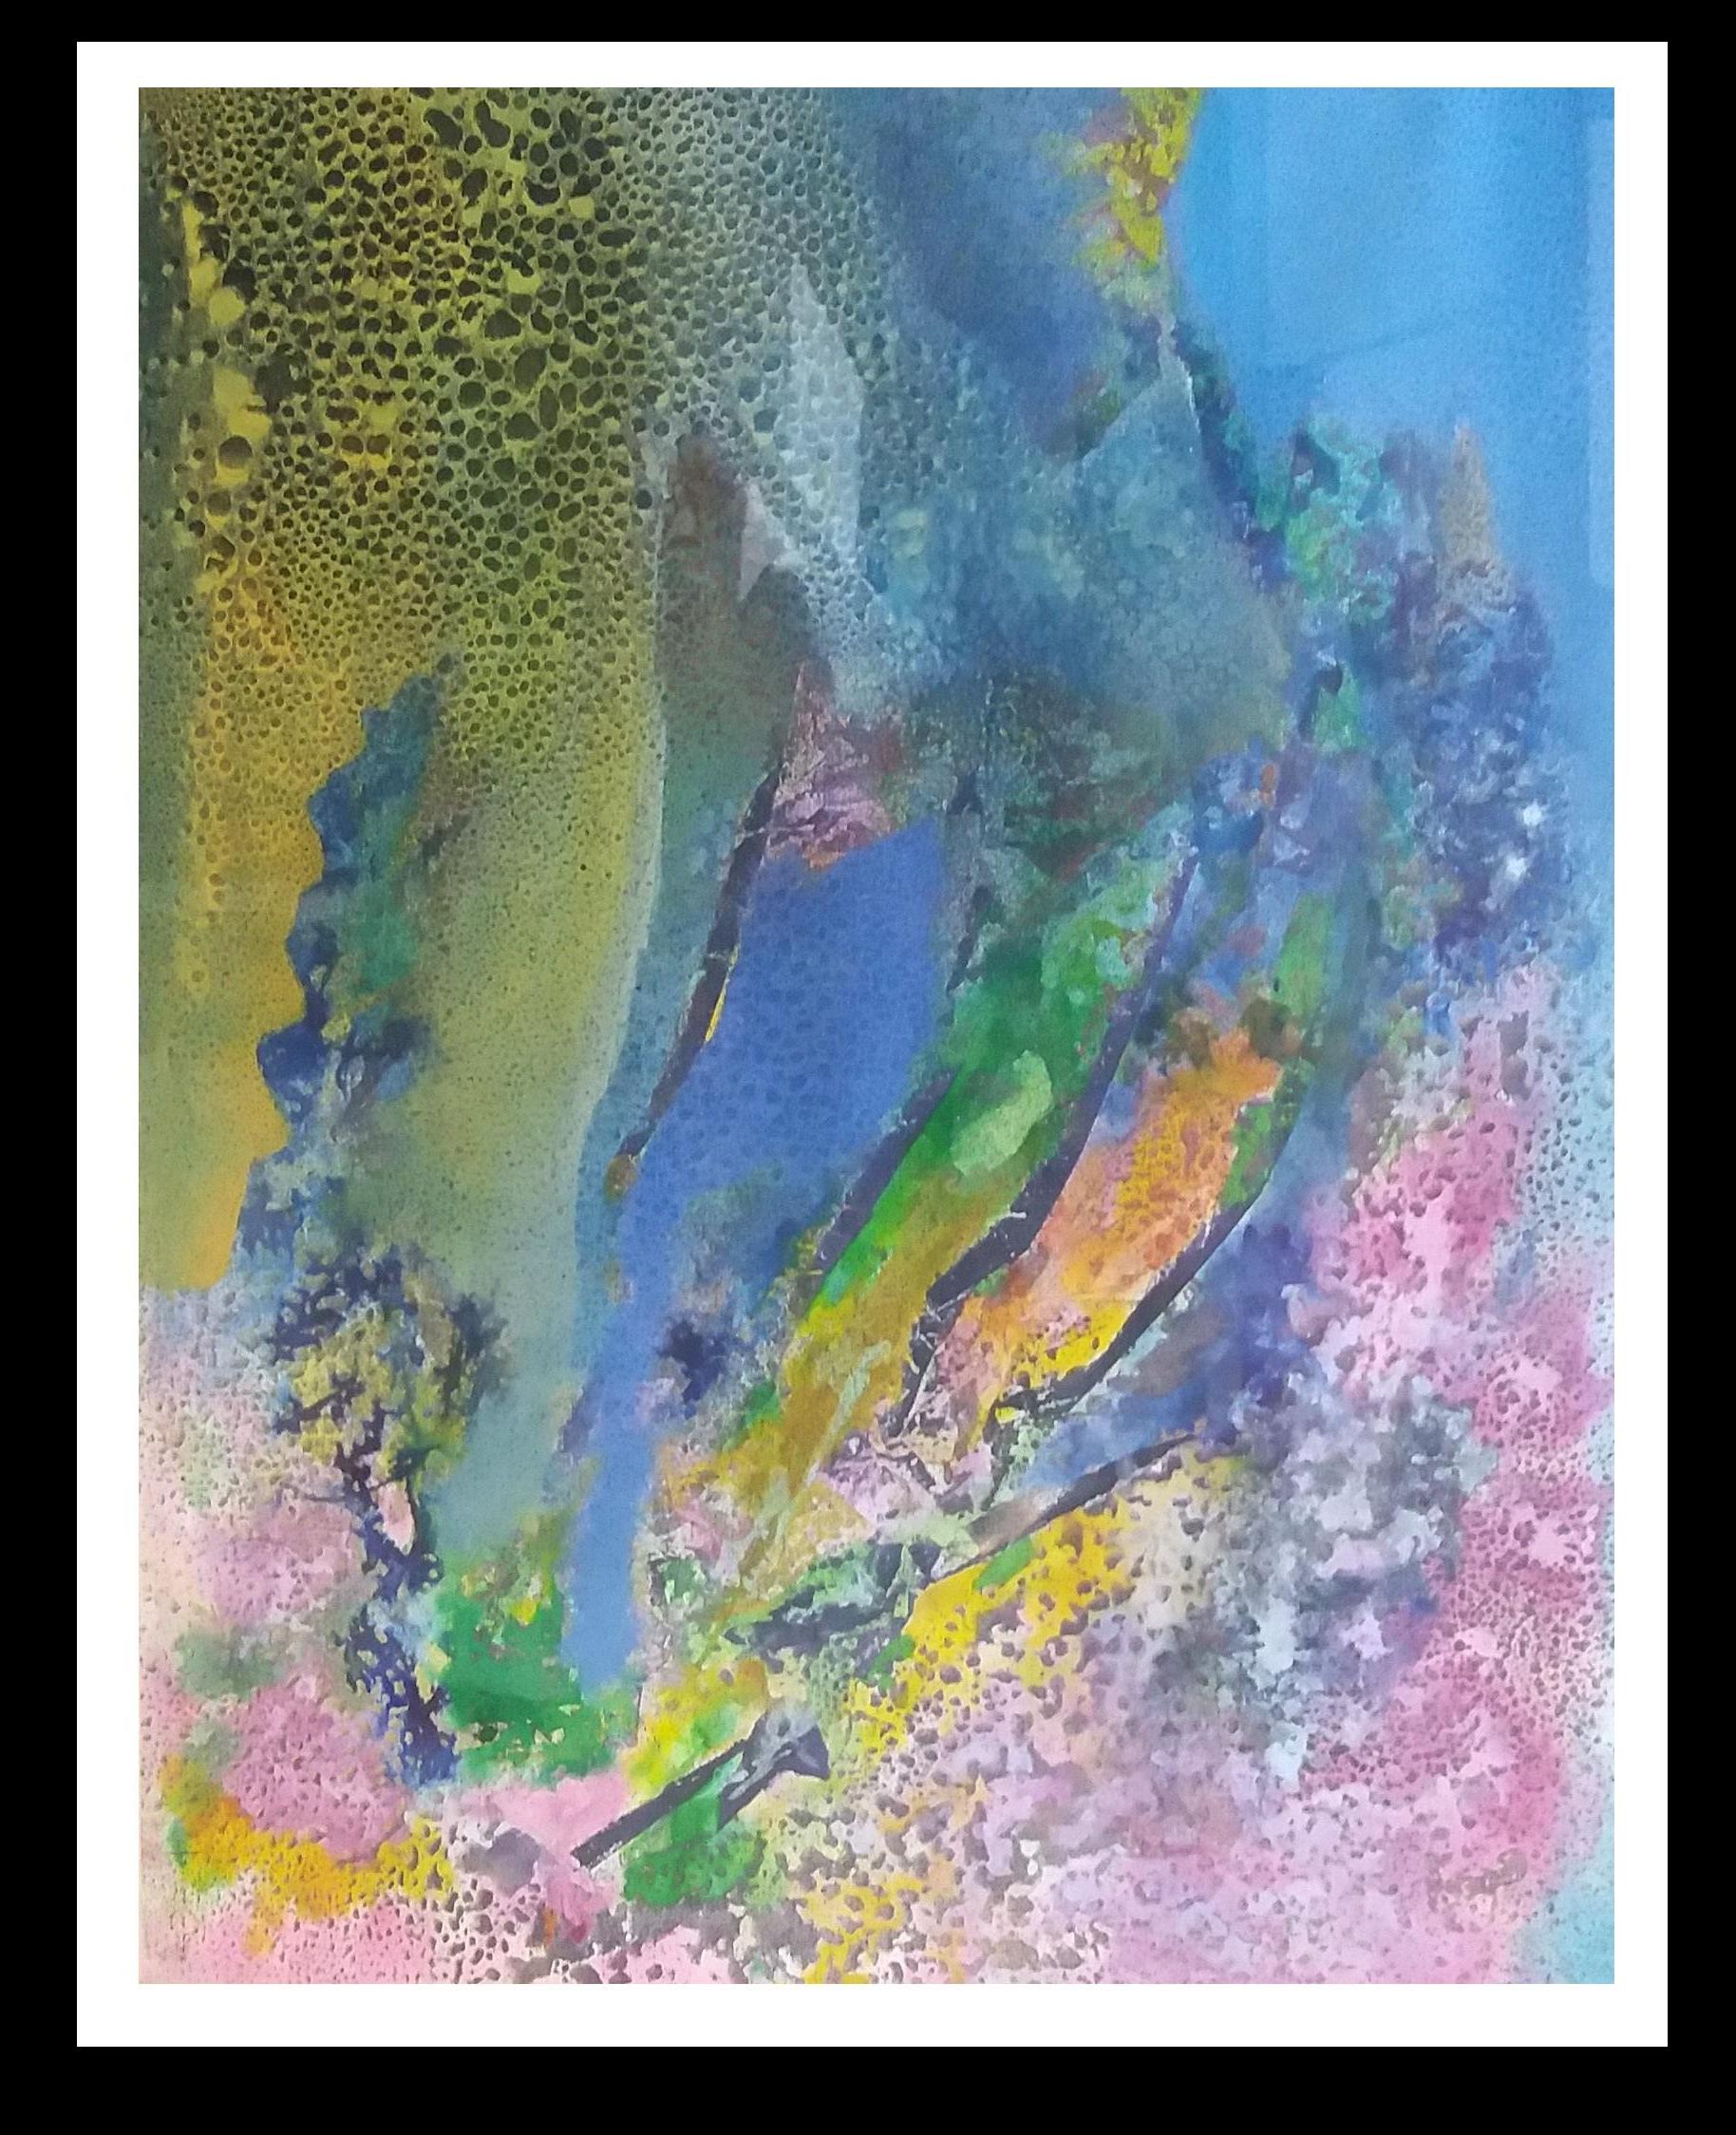  I. Cahue 5 Blue and Pink Drops abstract. original.acrylic paper painting - Painting by Isidro Cahue